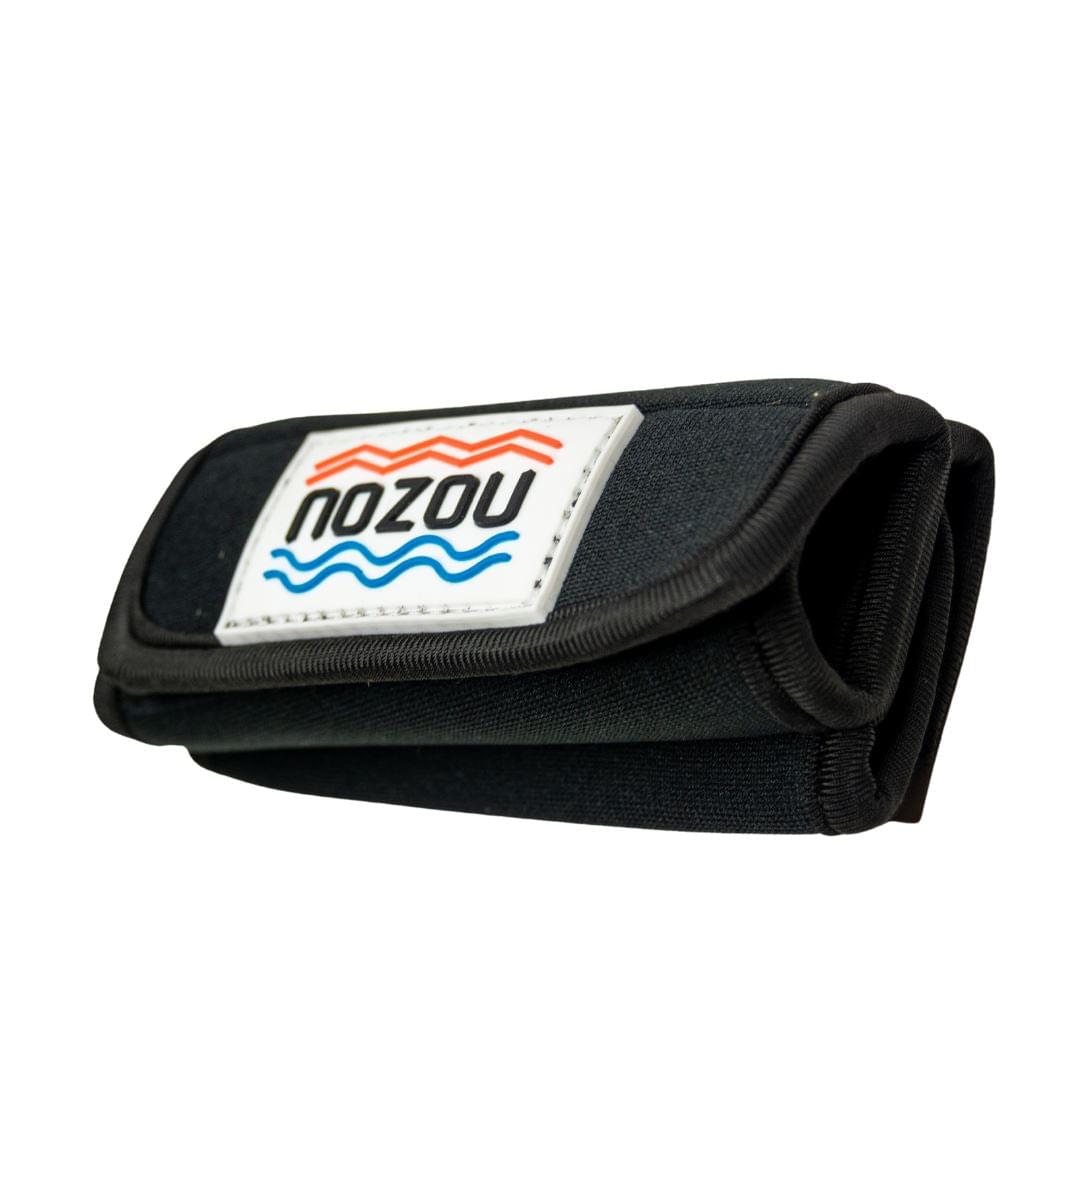 NOZOU Paddle Holder - Non-Slip Grip Fits Securely on Paddle Board Handle